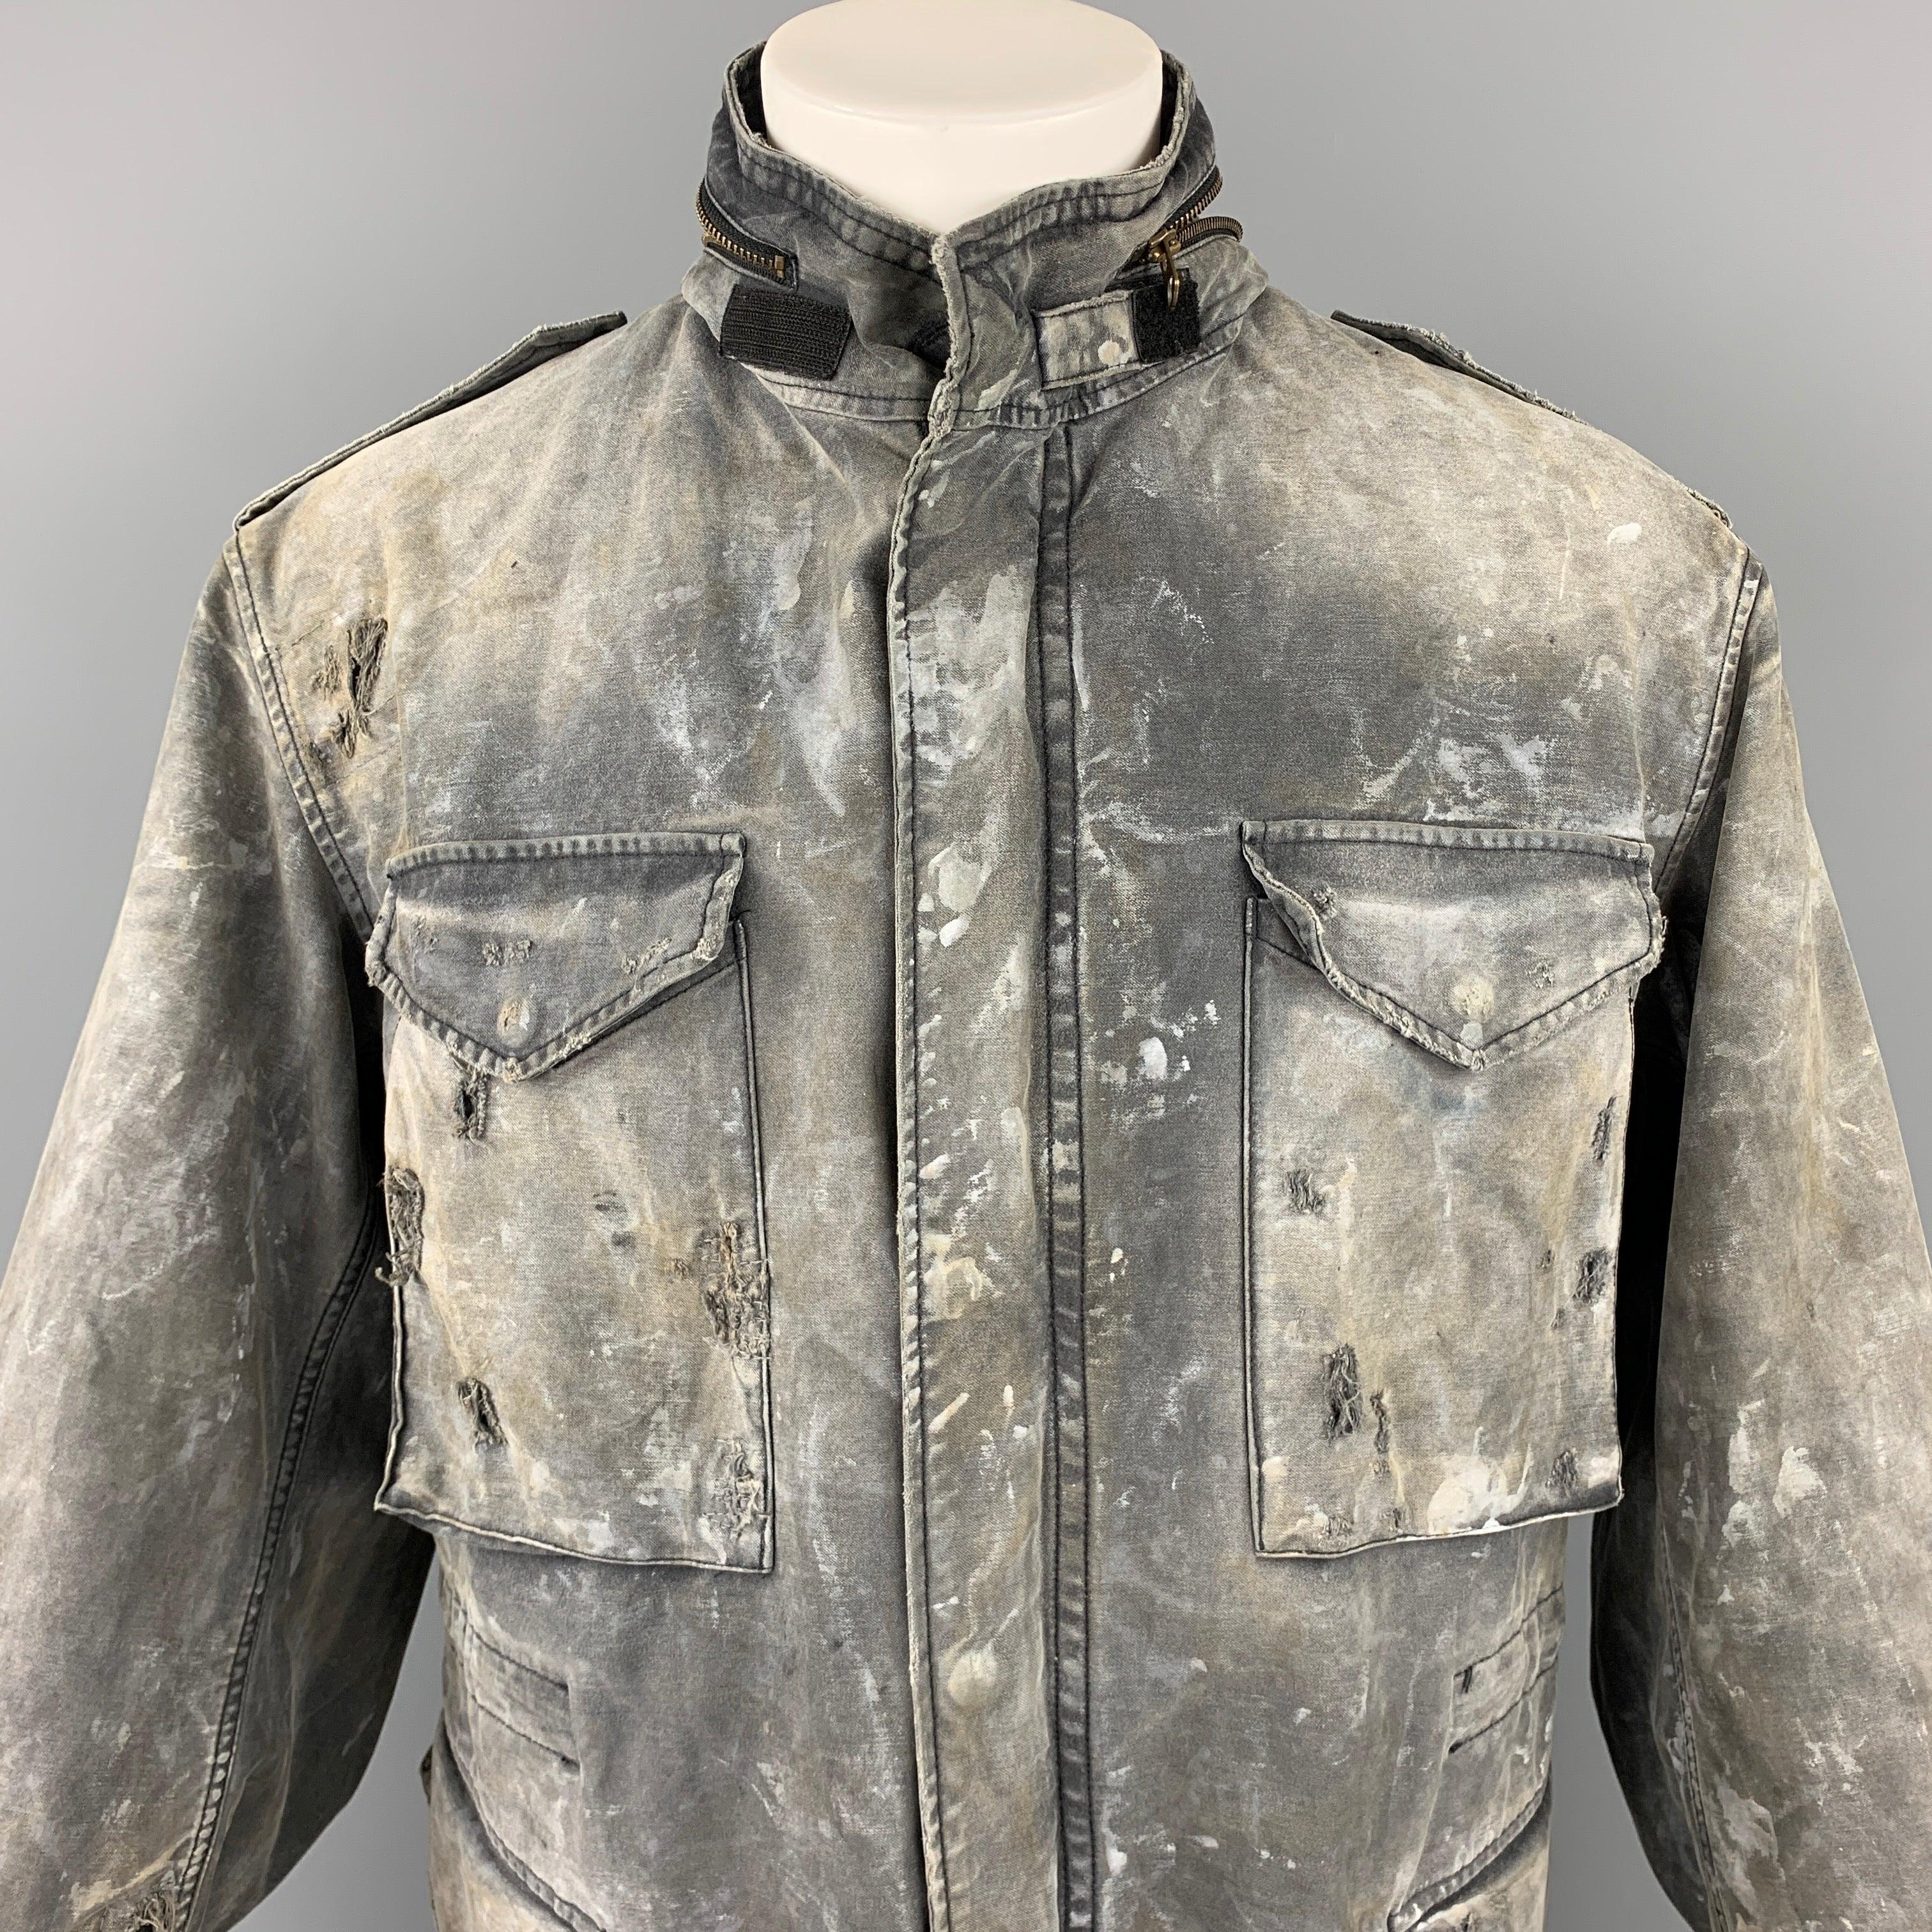 R13 jacket comes in a gray distressed cotton with a full liner featuring a destroyed military style, hooded, patch pockets, epaulettes, and a snap button closure. Made in Italy.
Very Good
Pre-Owned Condition. 

Marked:   M 

Measurements: 
